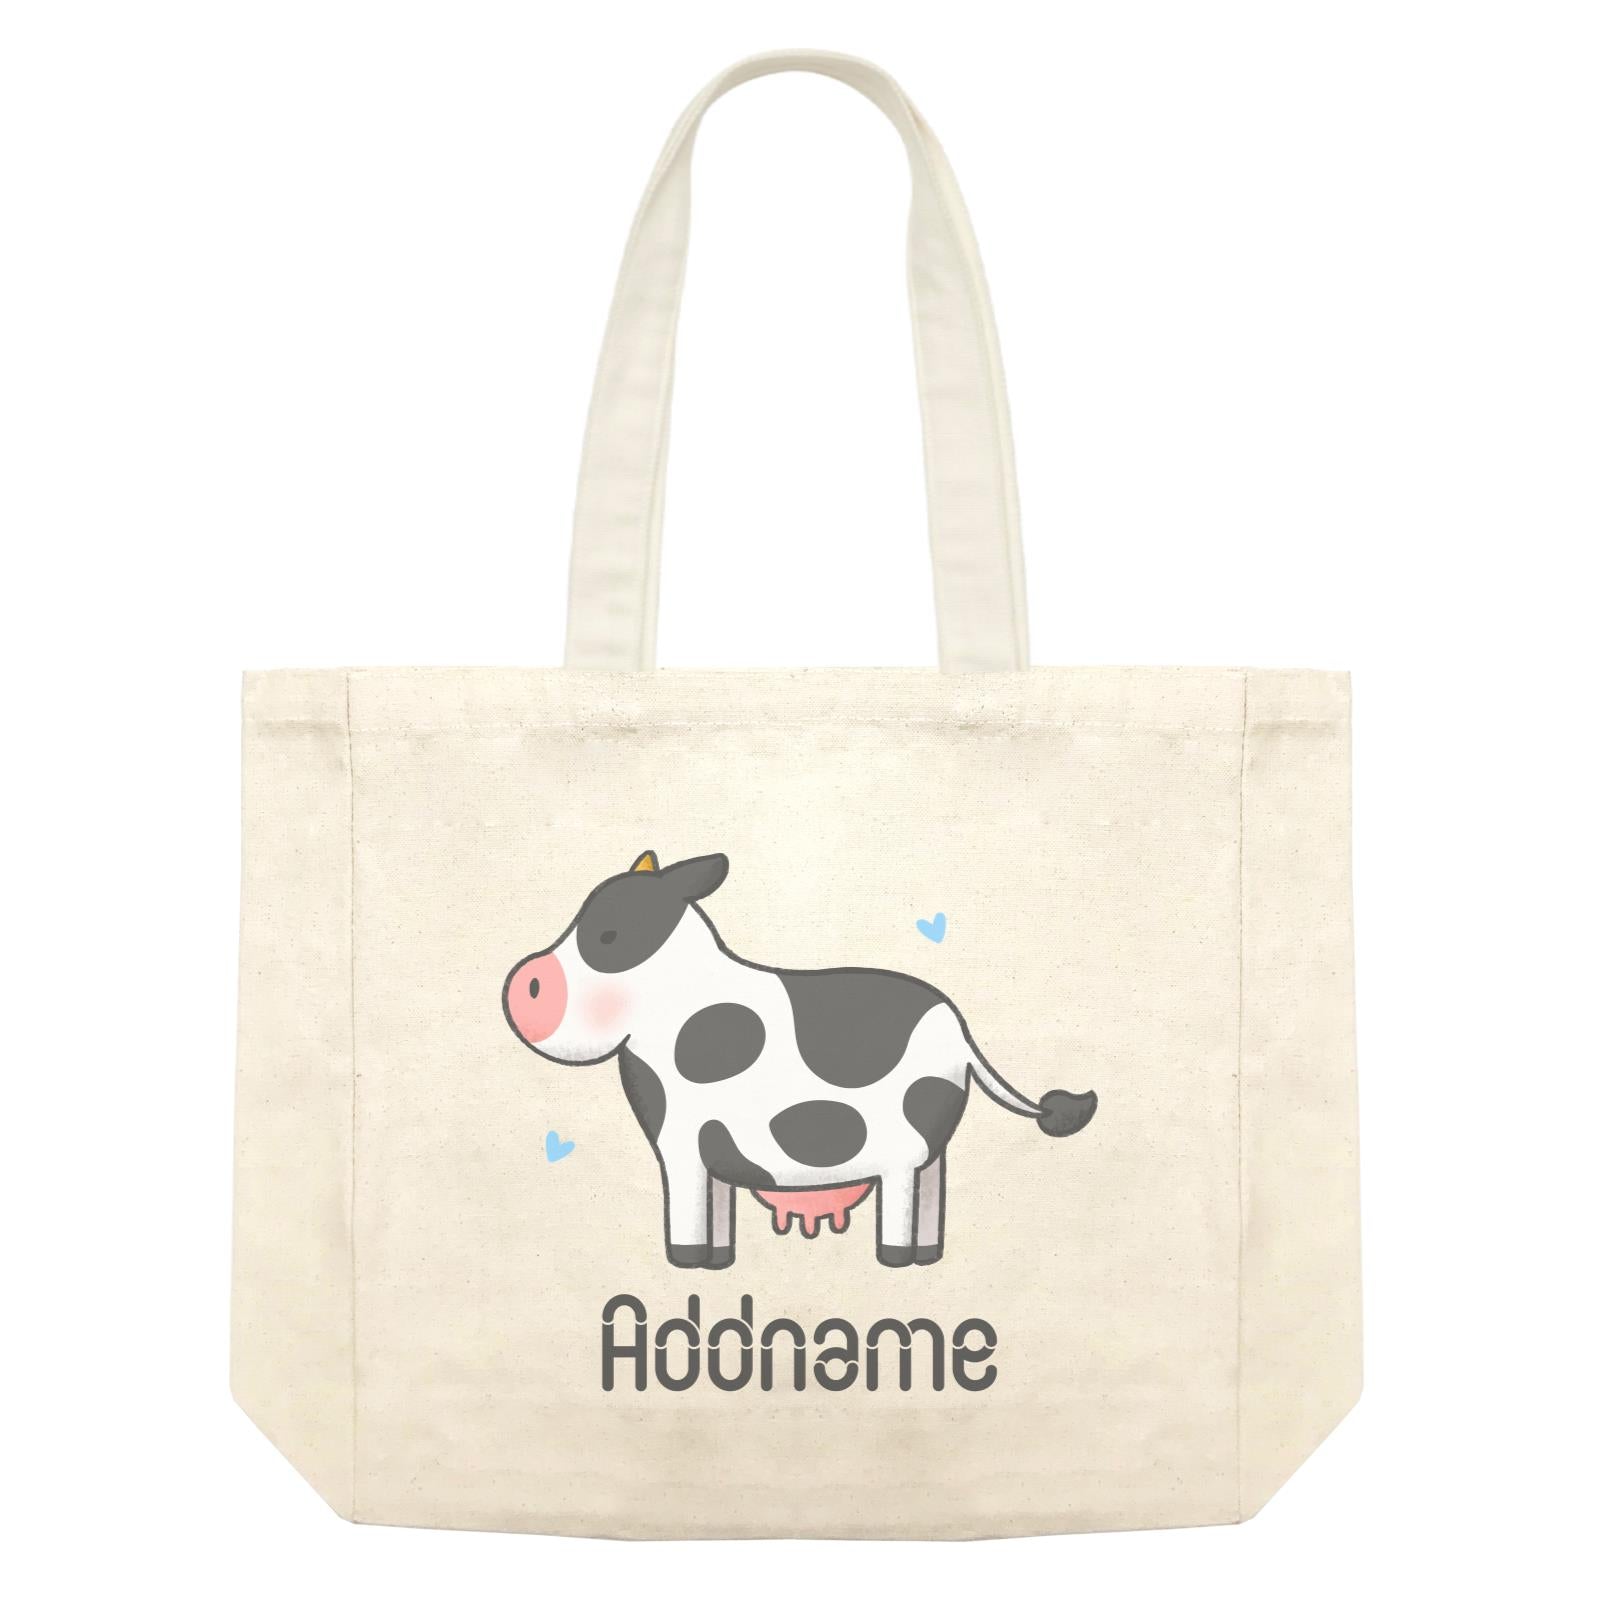 Cute Hand Drawn Style Cow Addname Shopping Bag